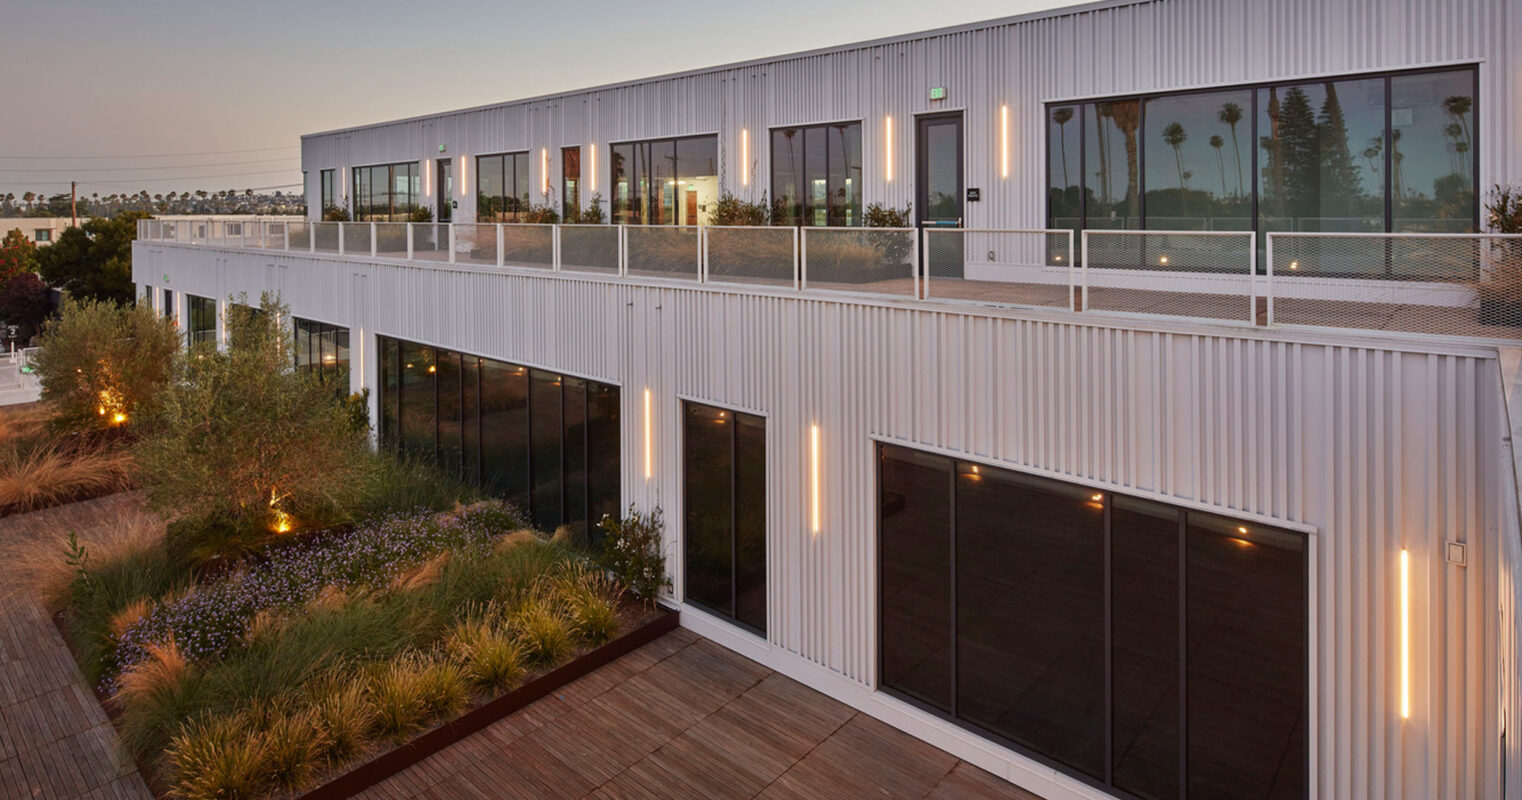 Modern industrial building exterior at dusk with ribbed metal cladding, floor-to-ceiling windows, and integrated planters on a rooftop terrace with ambient lighting.